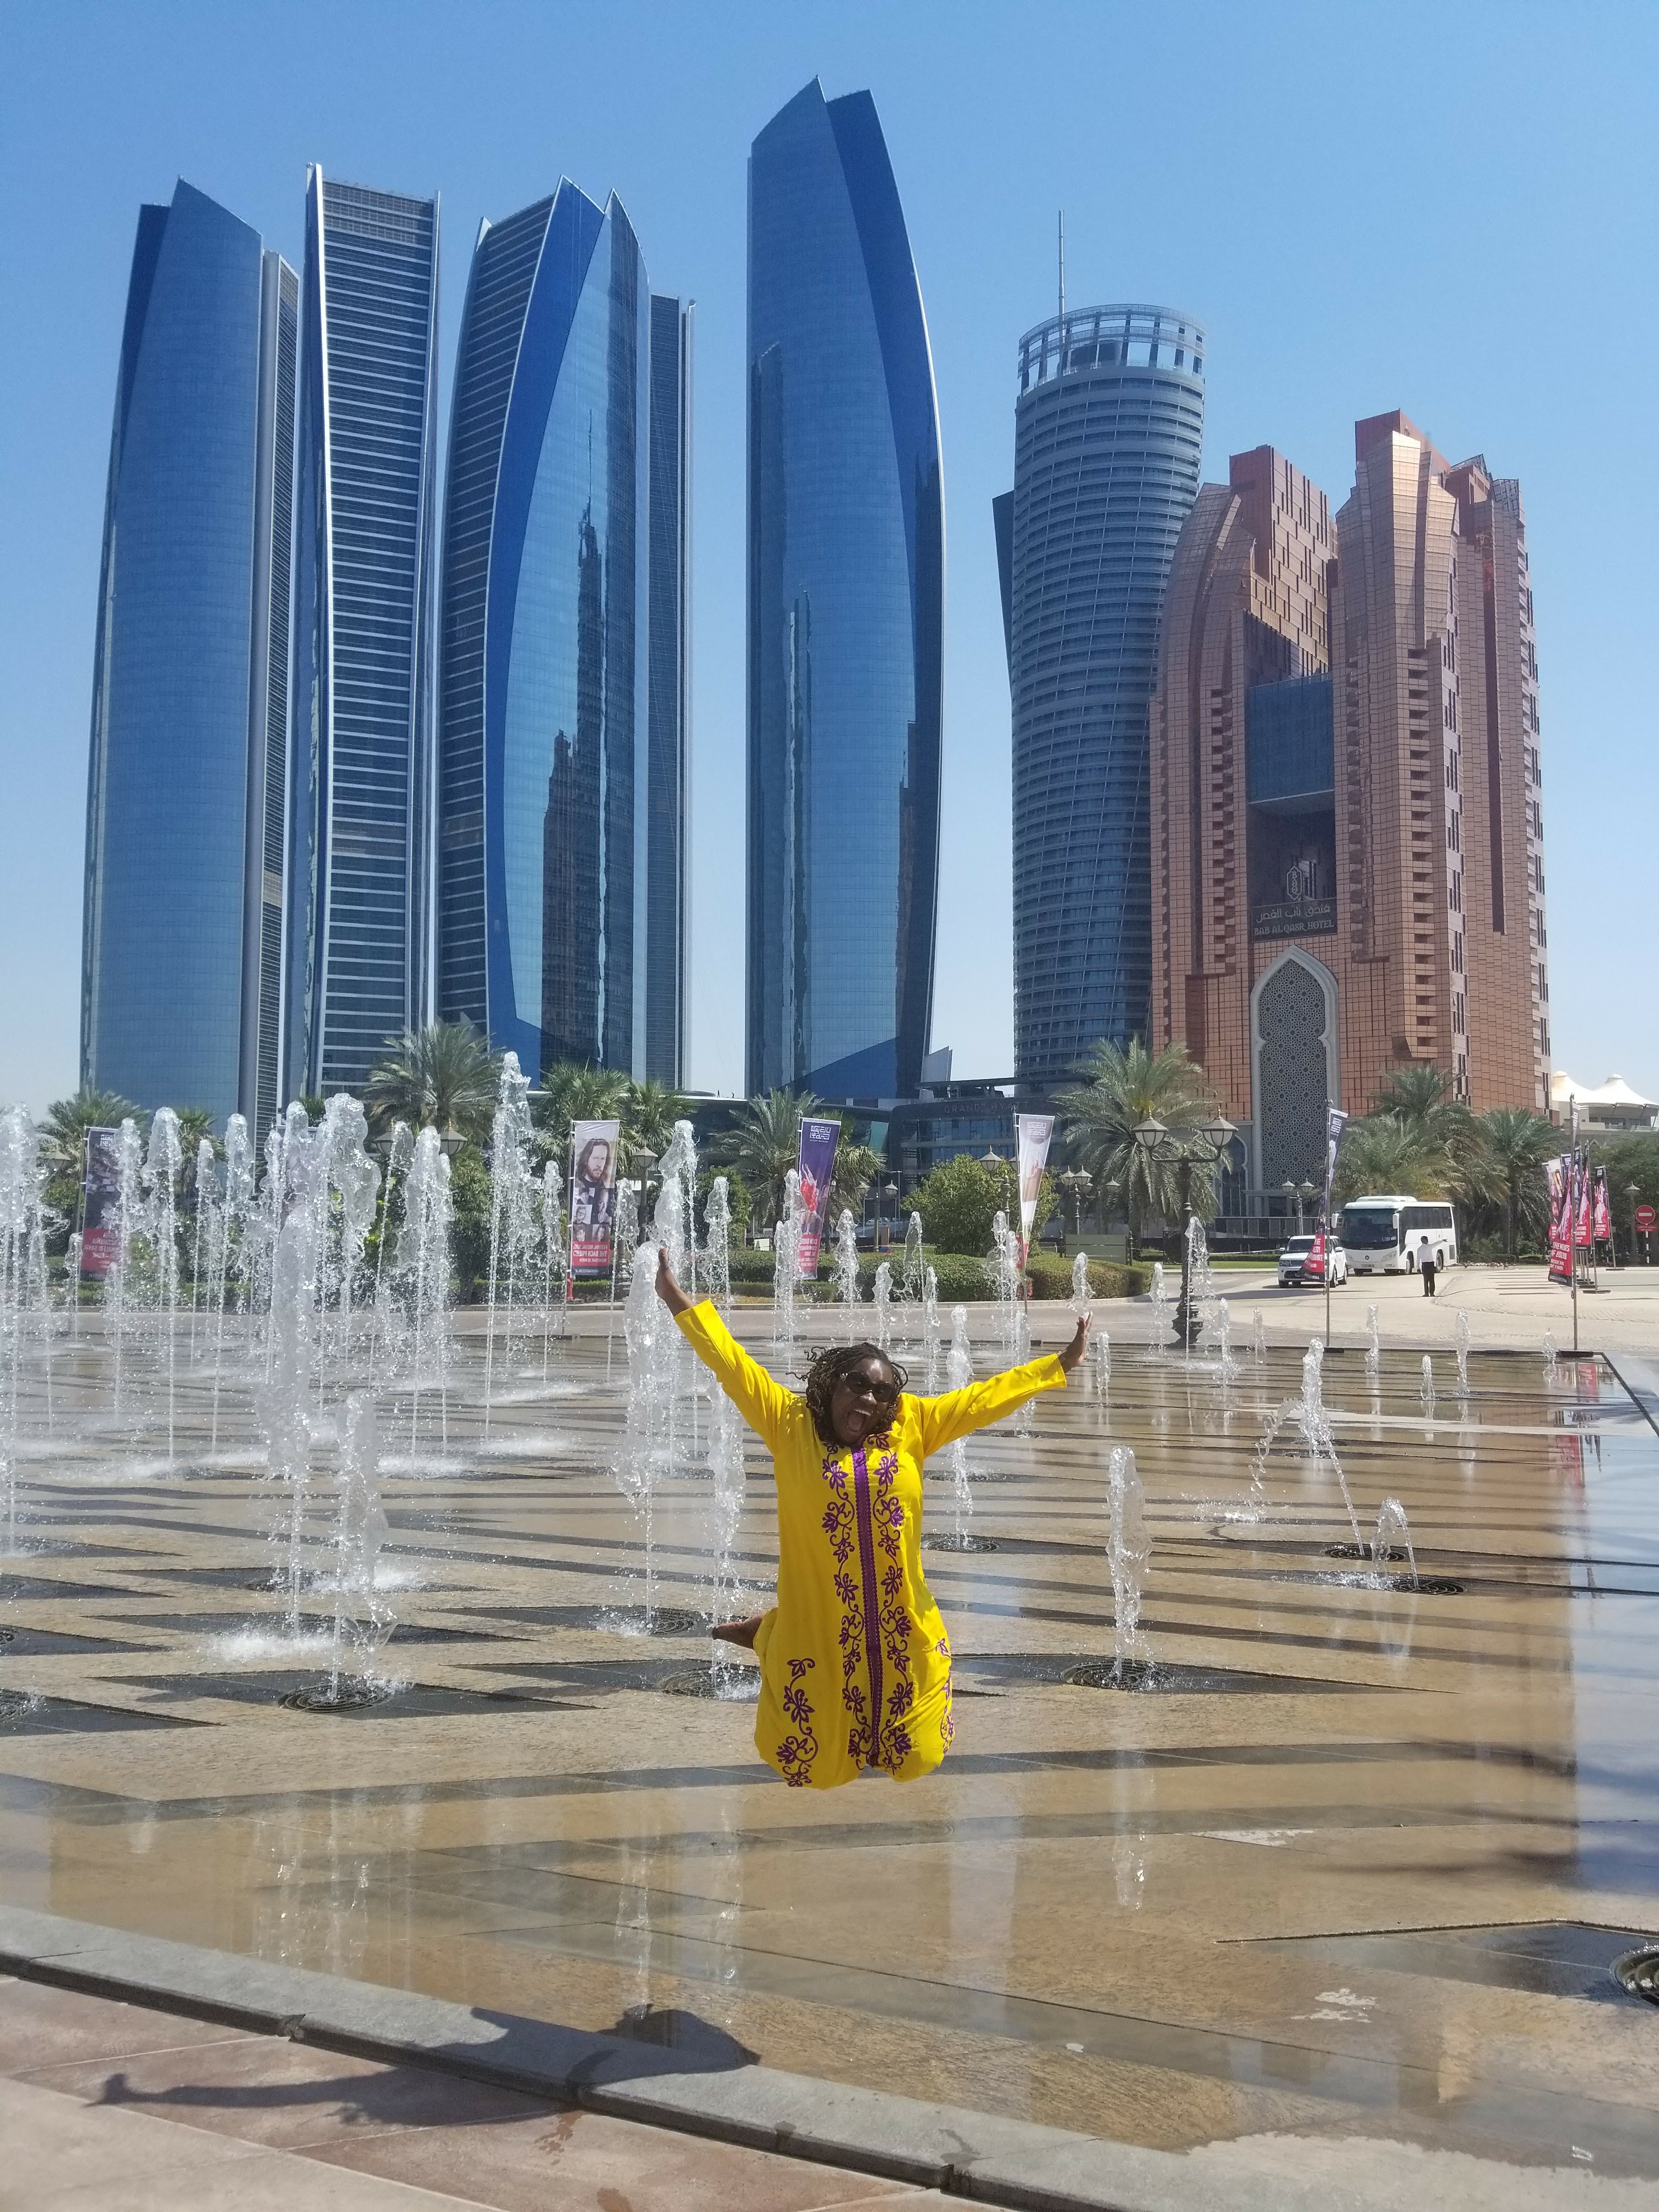 The Black Expat: Living In Abu Dhabi As A Black Woman Has Been 'Amazing'